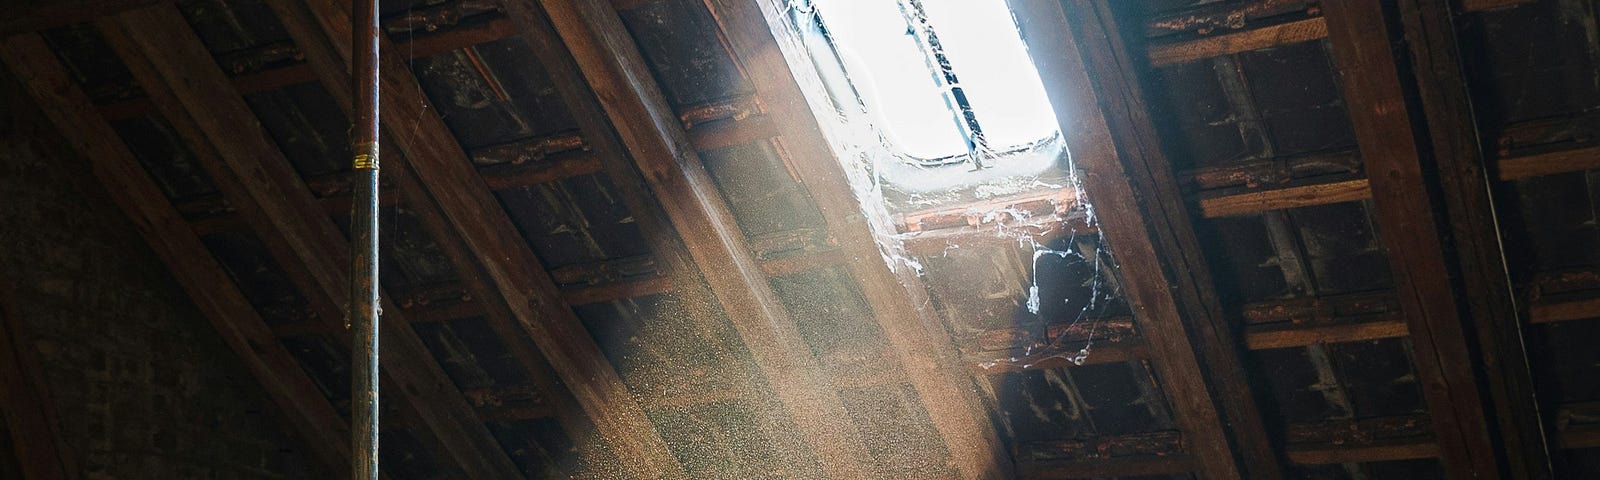 Light coming out of a window in a dusty, empty, attic